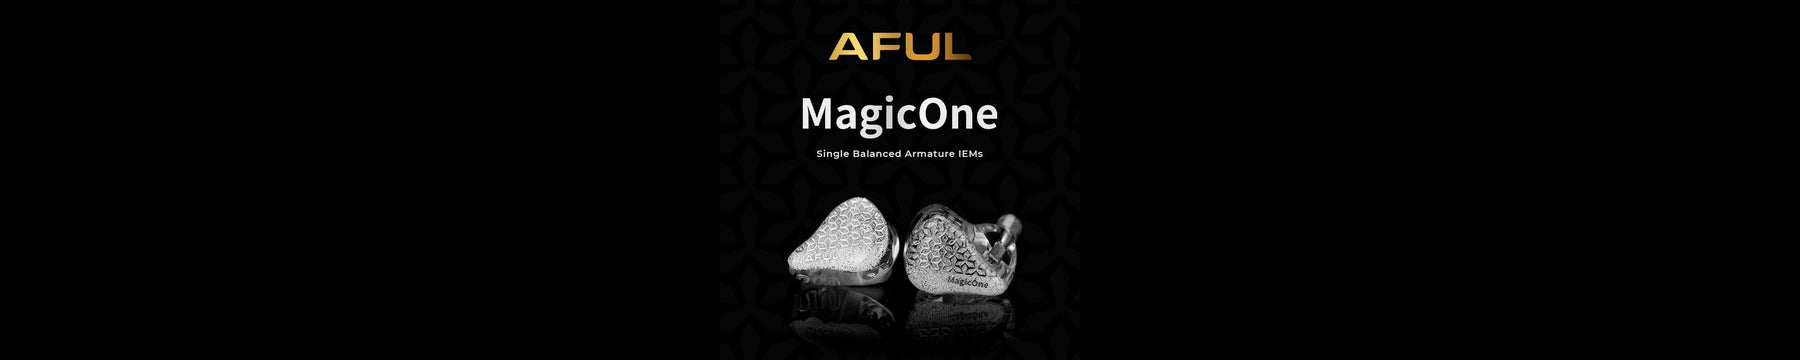 AFUL MagicOne Review Roundup